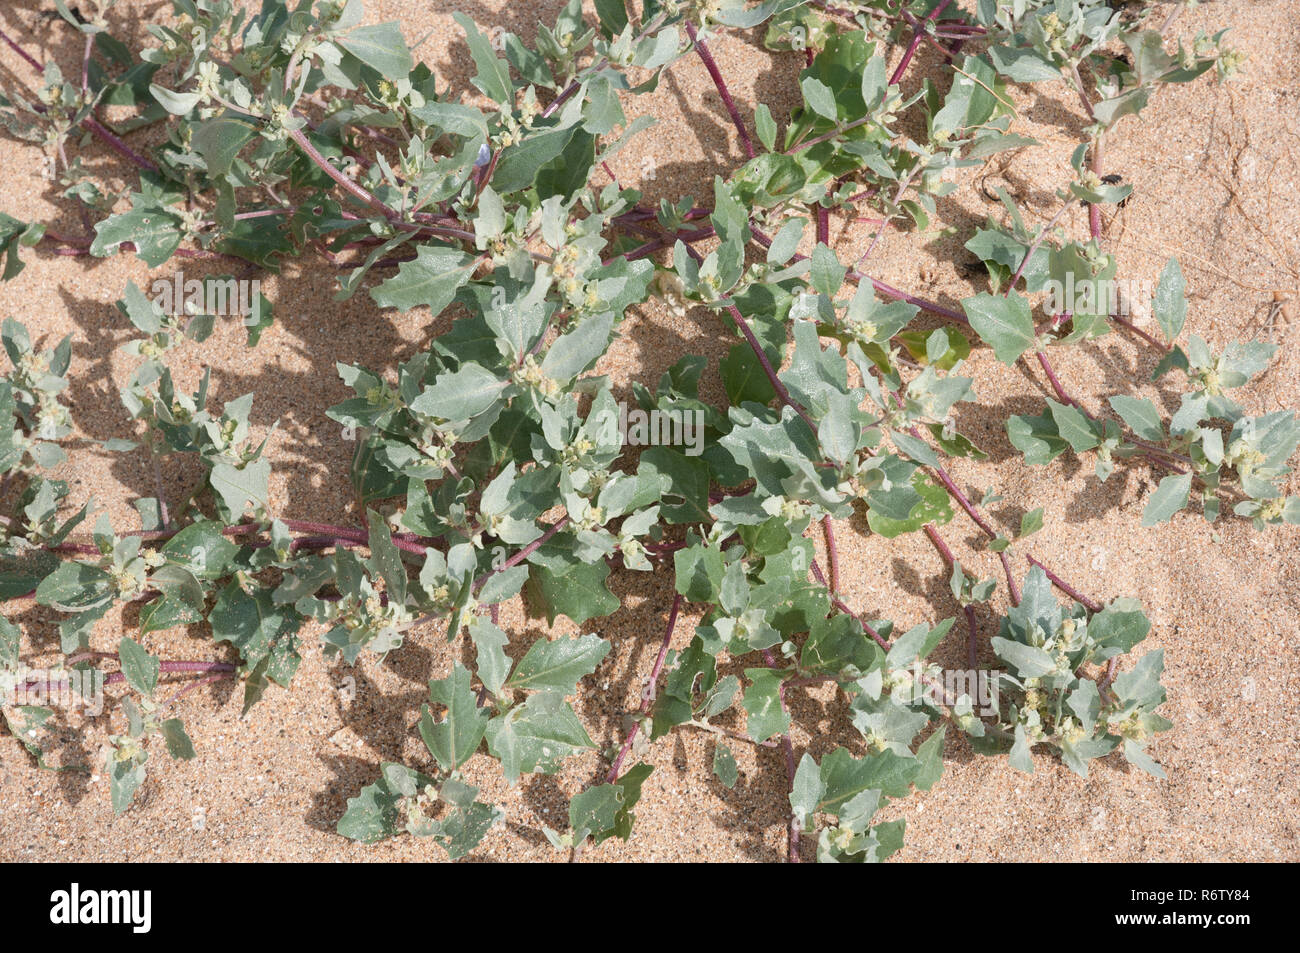 Frosted Orache(Atriplex laciniata) on a beach in Northumberland, England Stock Photo